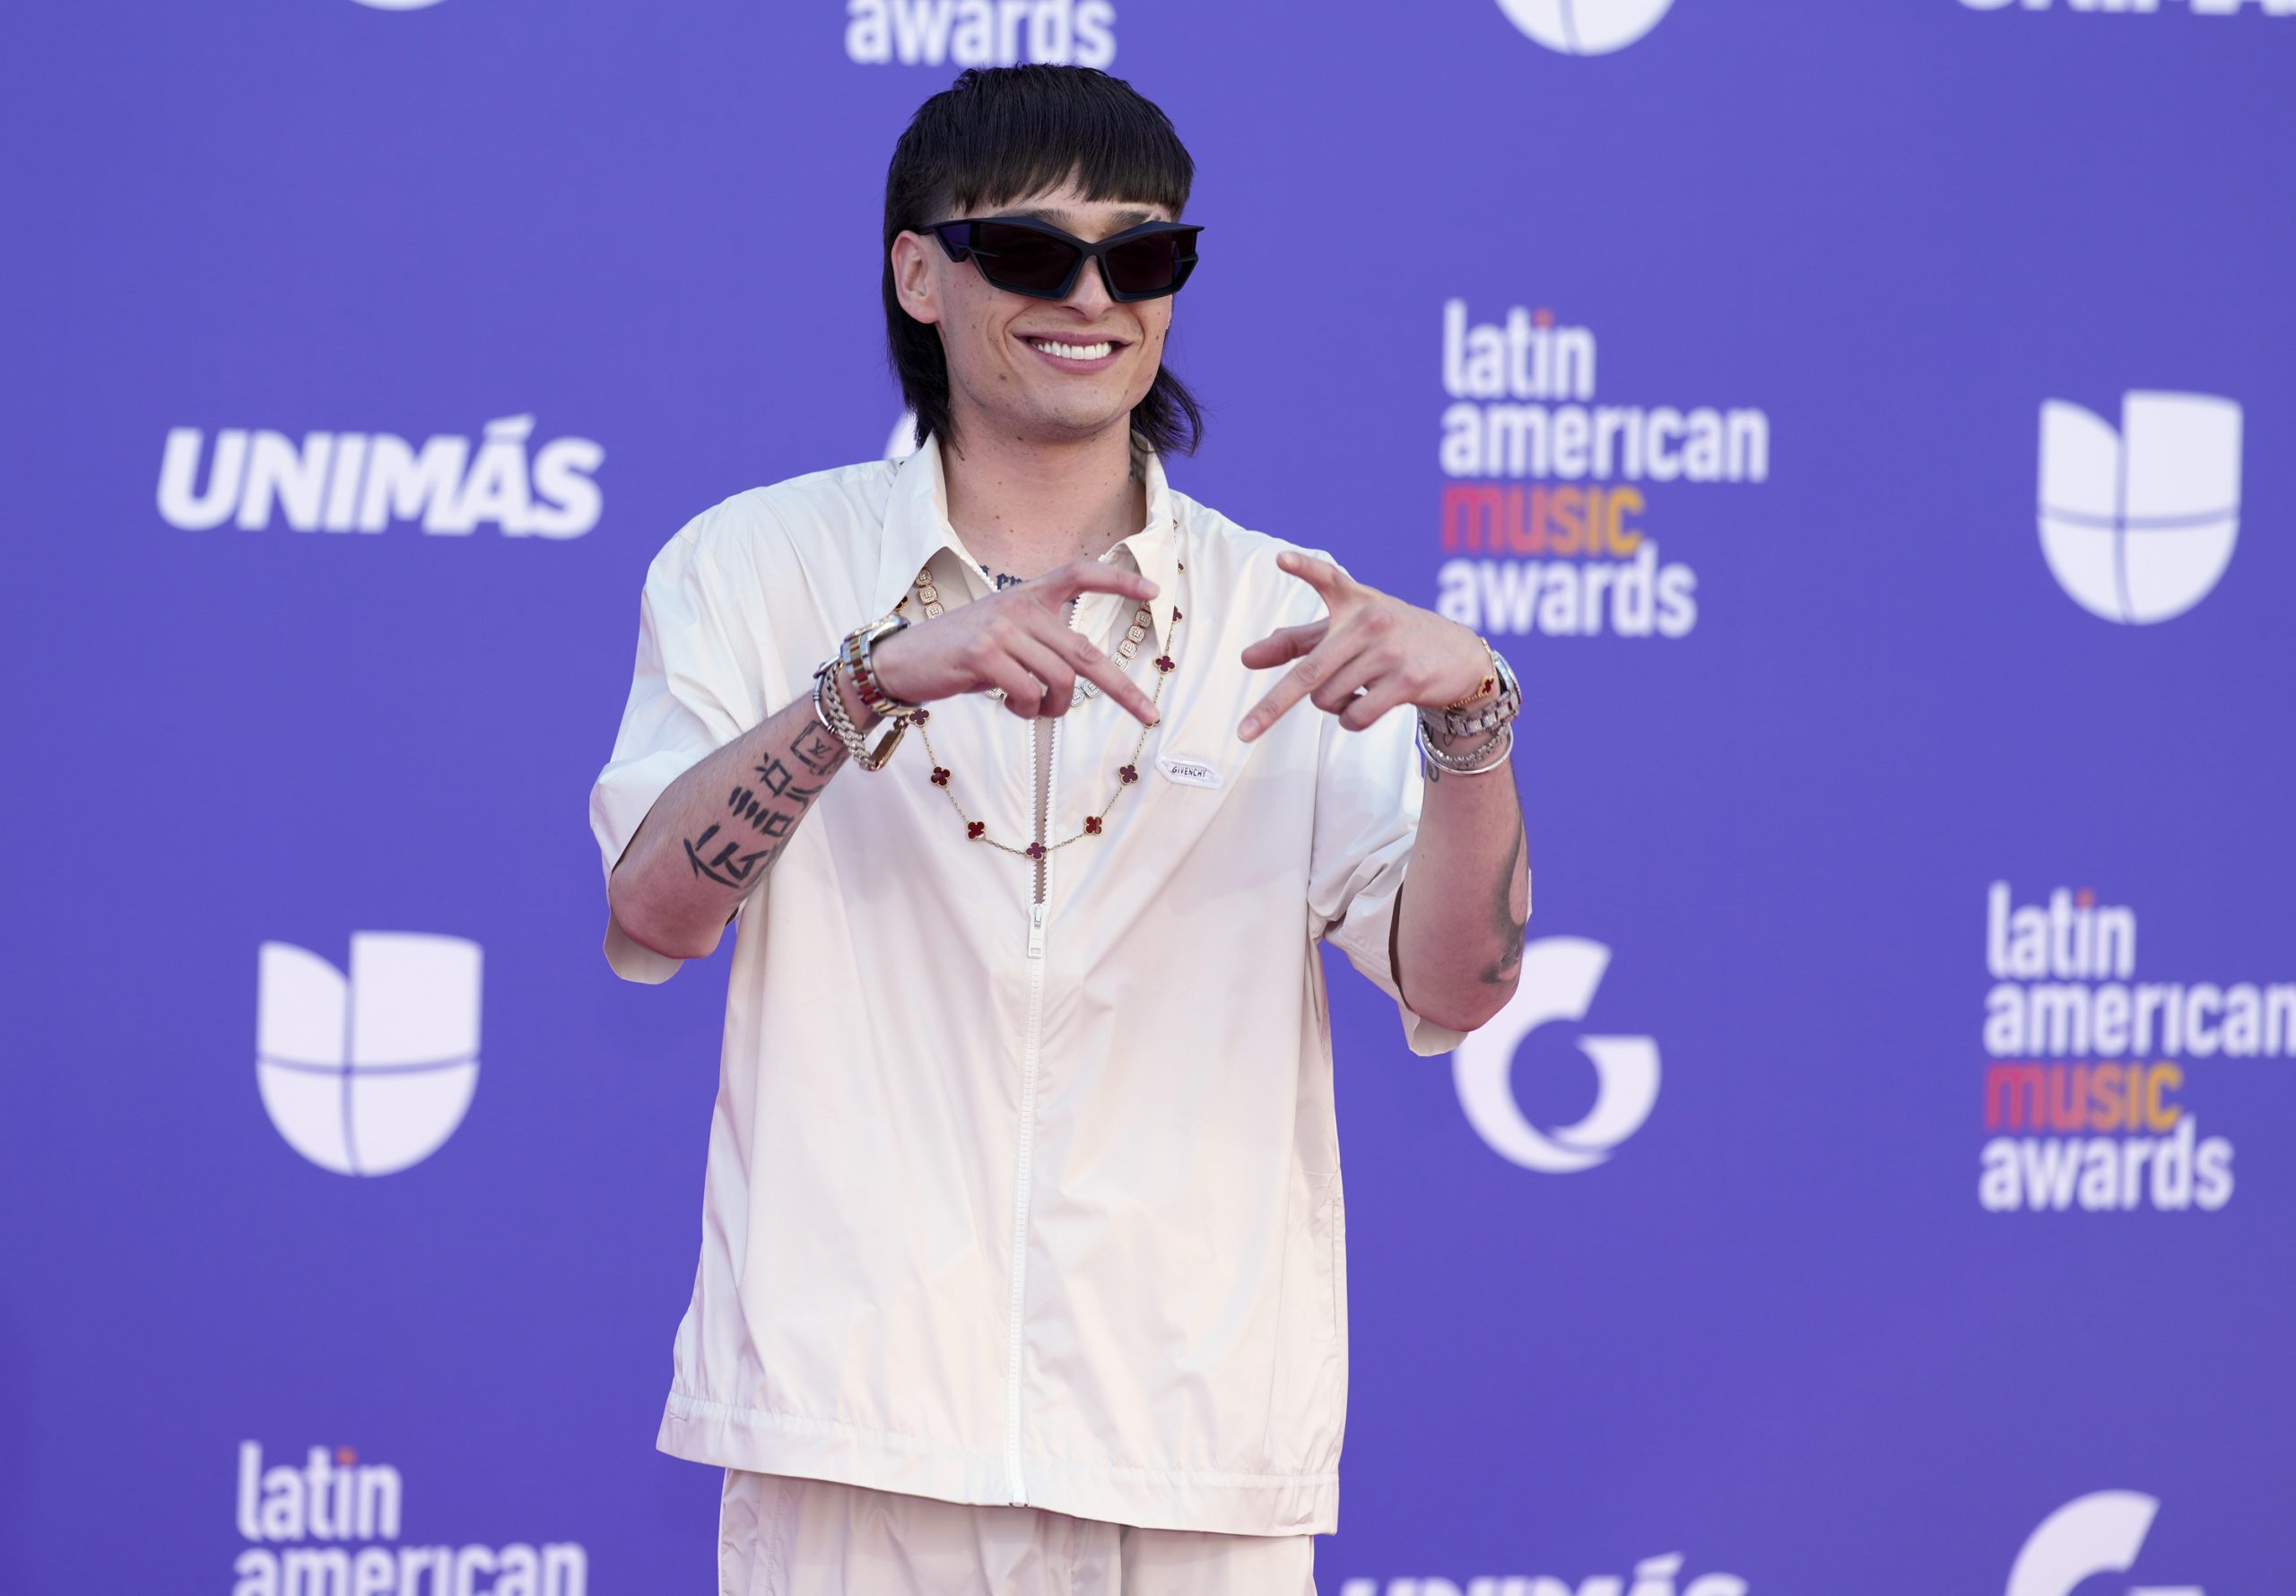 Image of Peso Pluma a Mexican rapper, musician and singer.